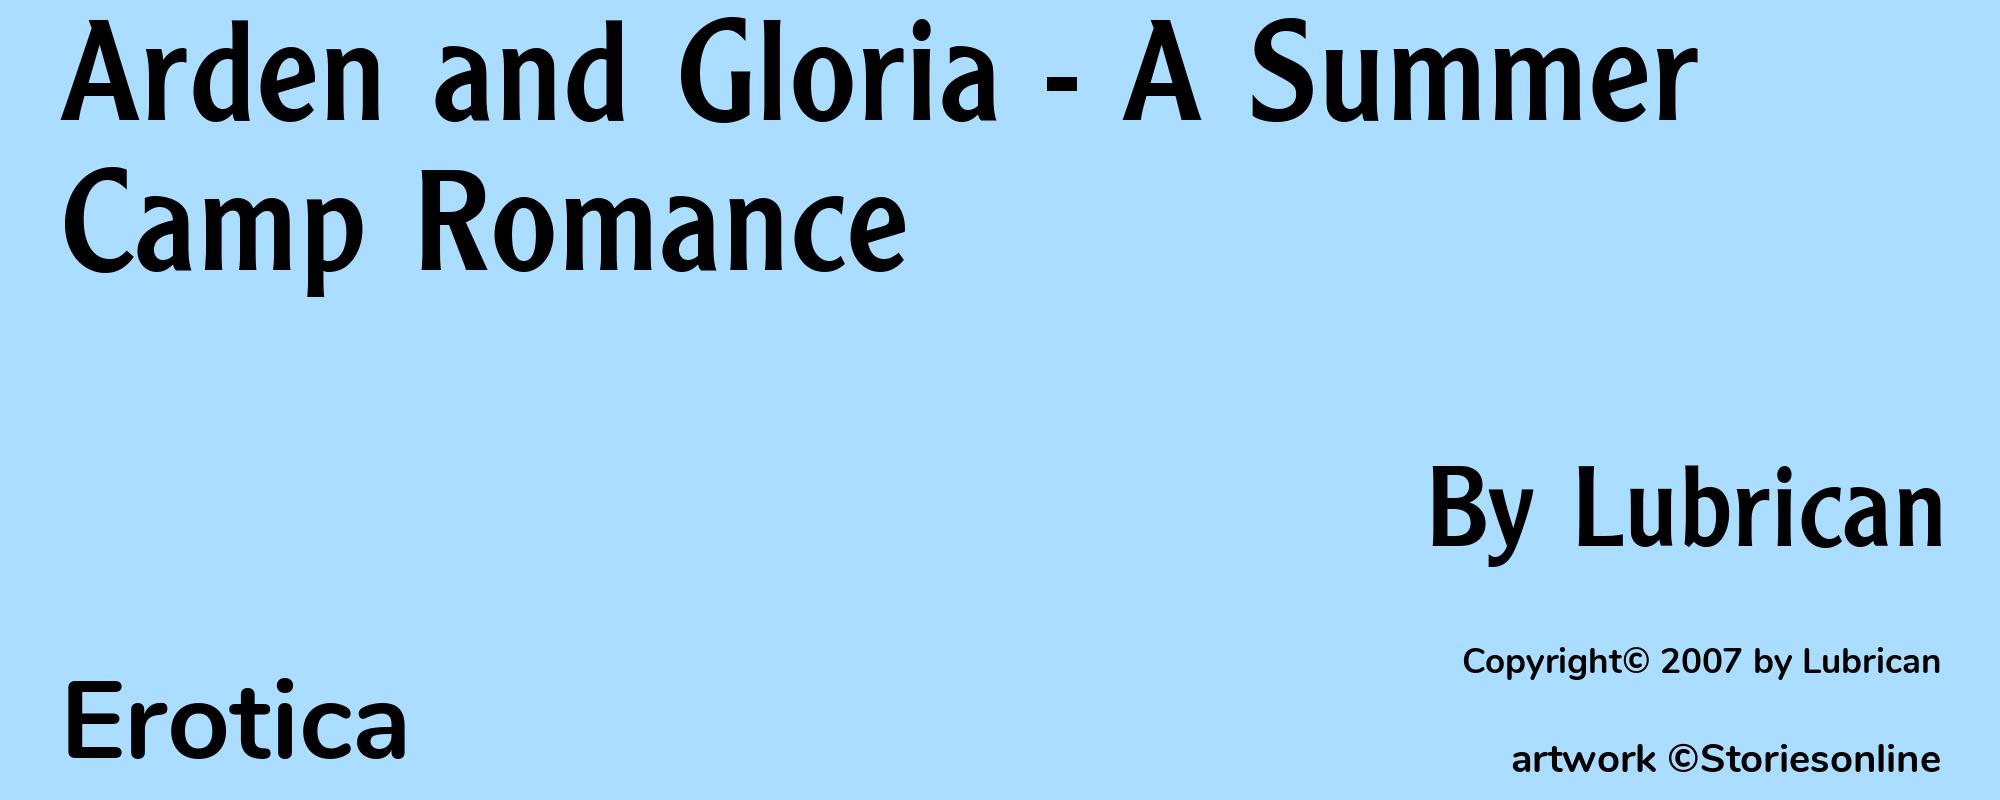 Arden and Gloria - A Summer Camp Romance - Cover